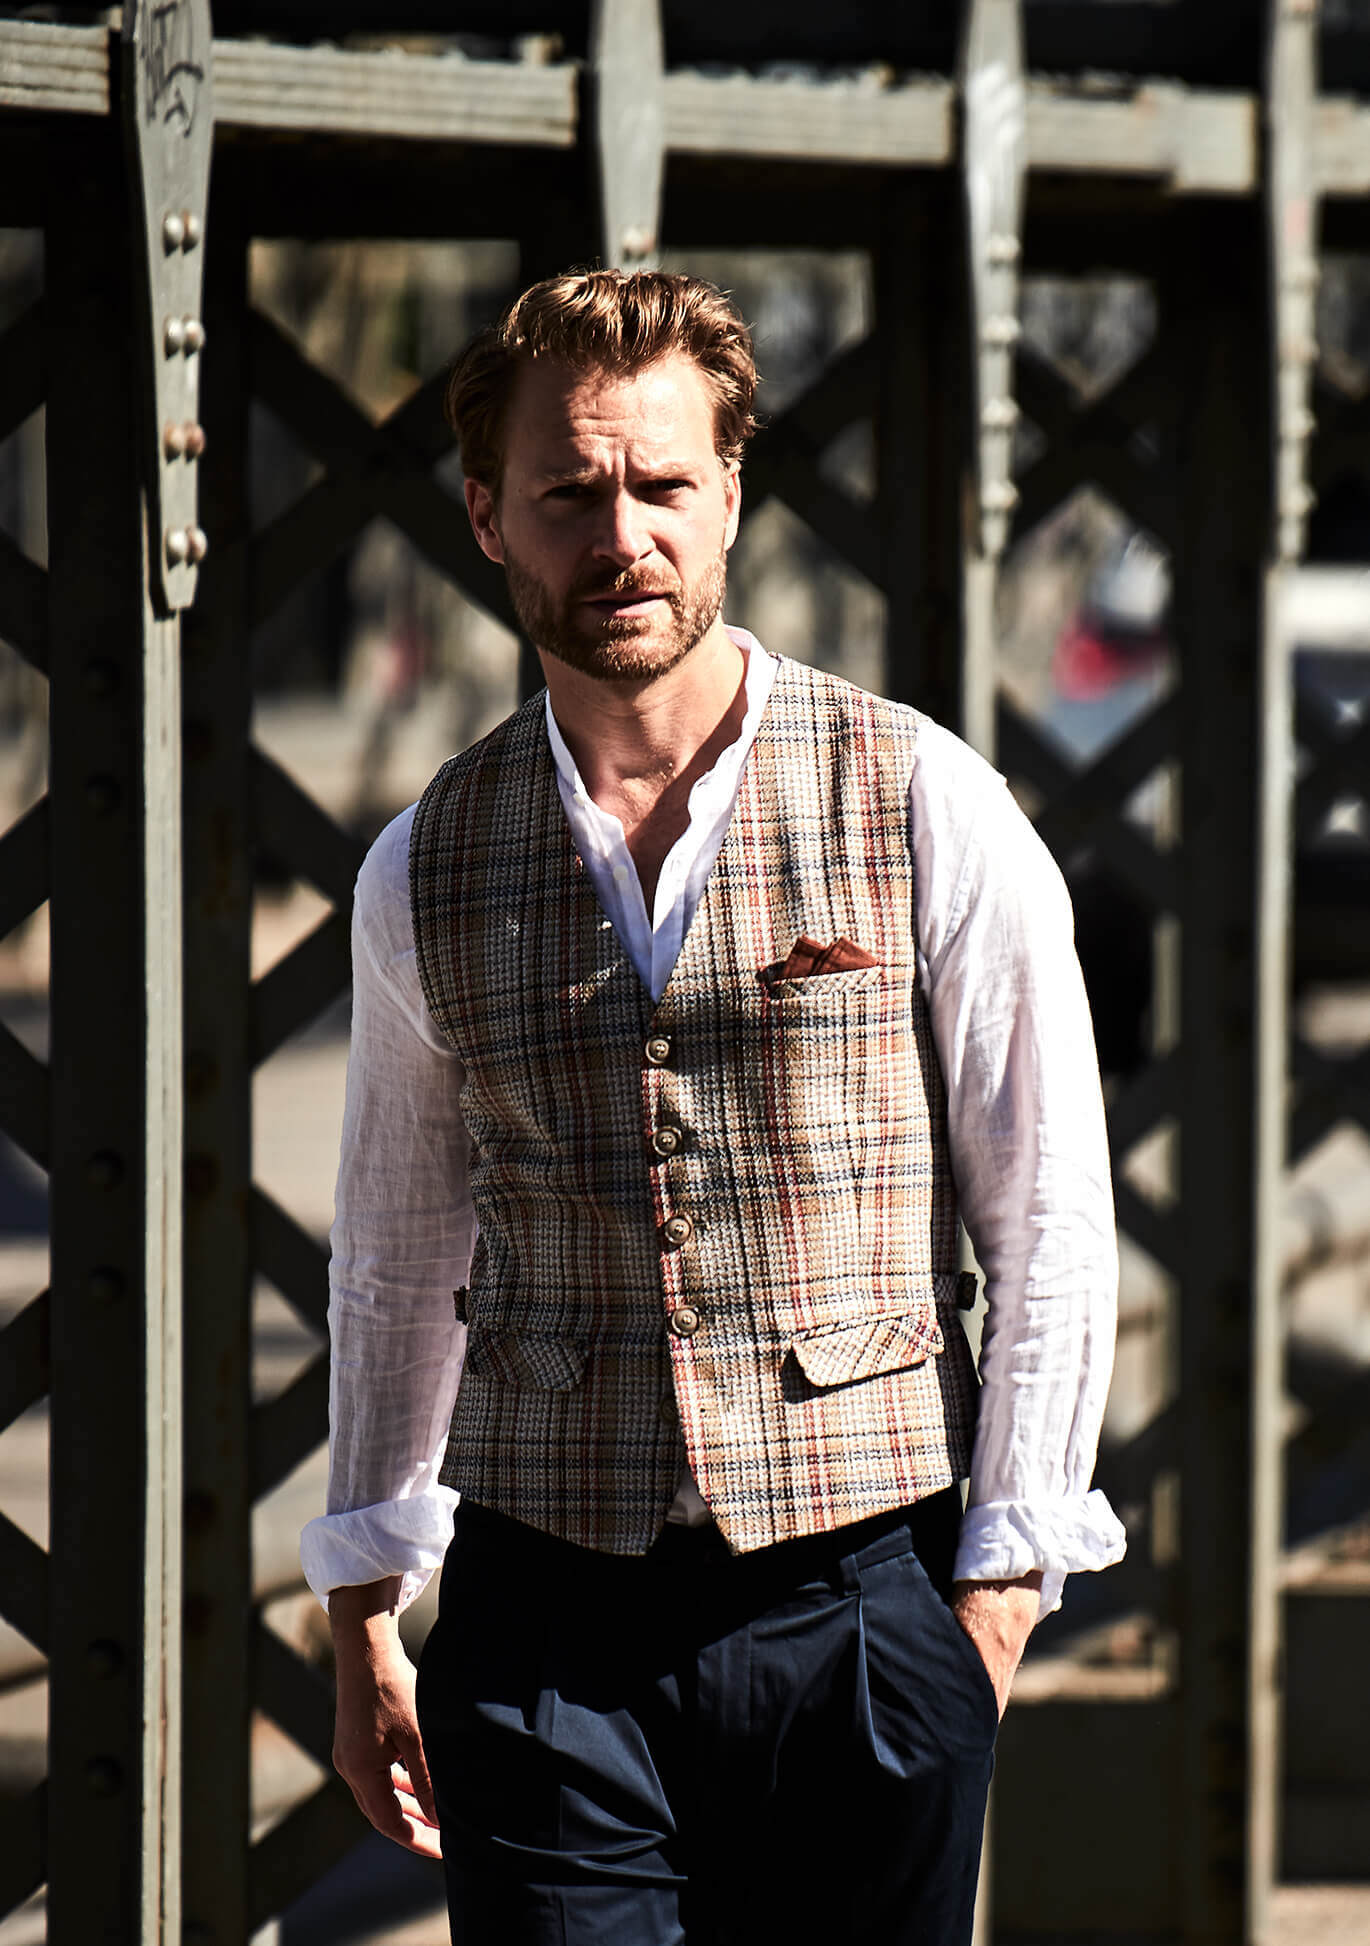 Men's Waistcoats & Vests - What They Are & How To Wear Them